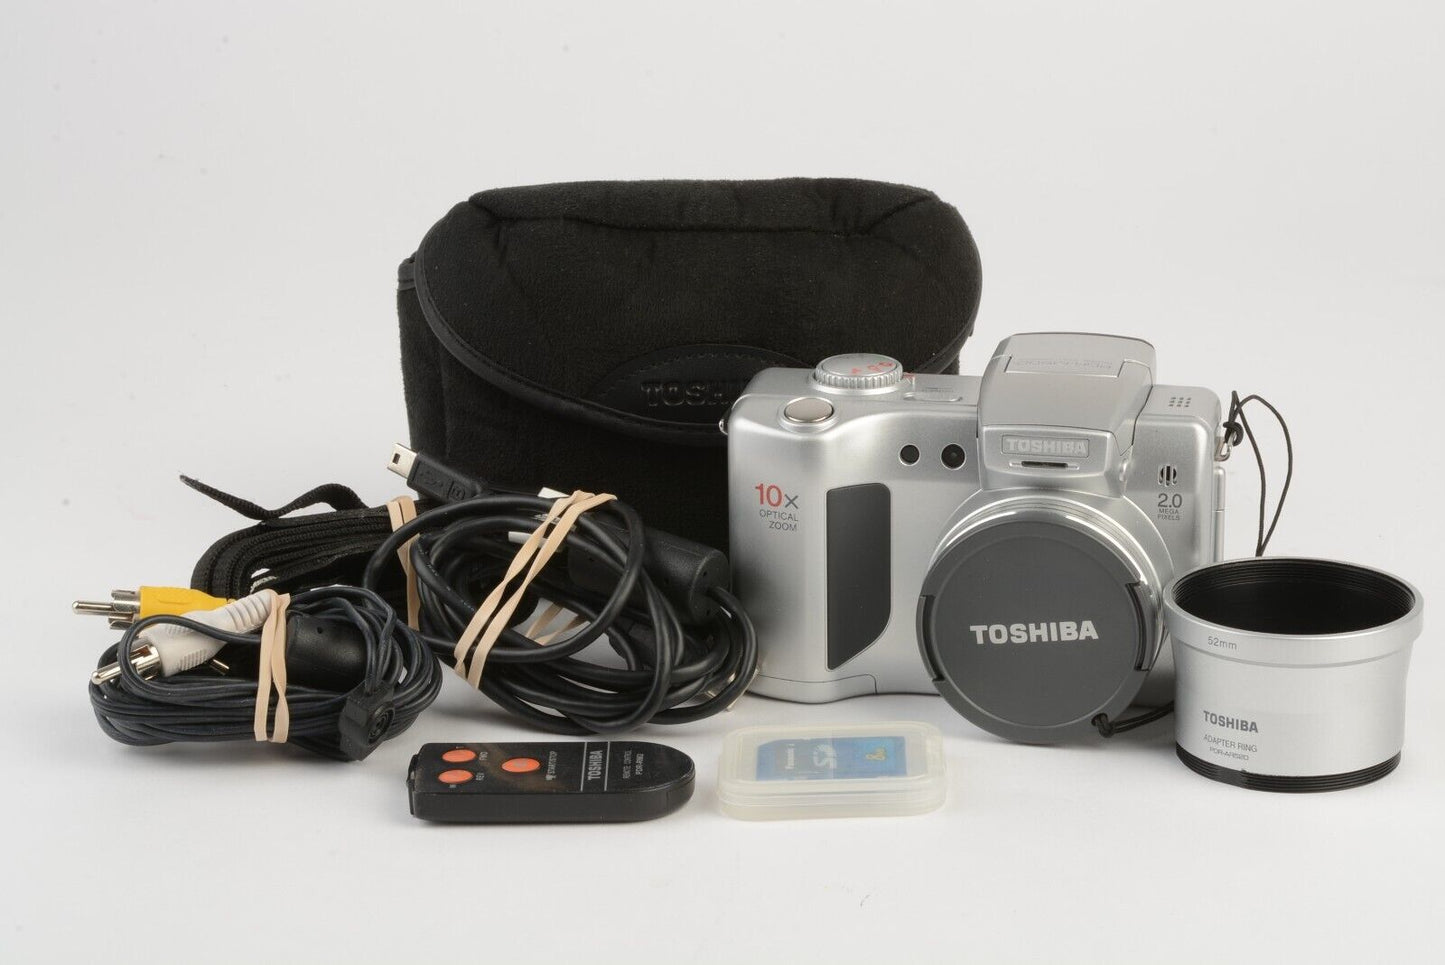 MINT- TOSHIBA PDR-M500 2MP CAMERA, CASE, 52mm ADAPTER RING, 8MB SD CARD, REMOTE